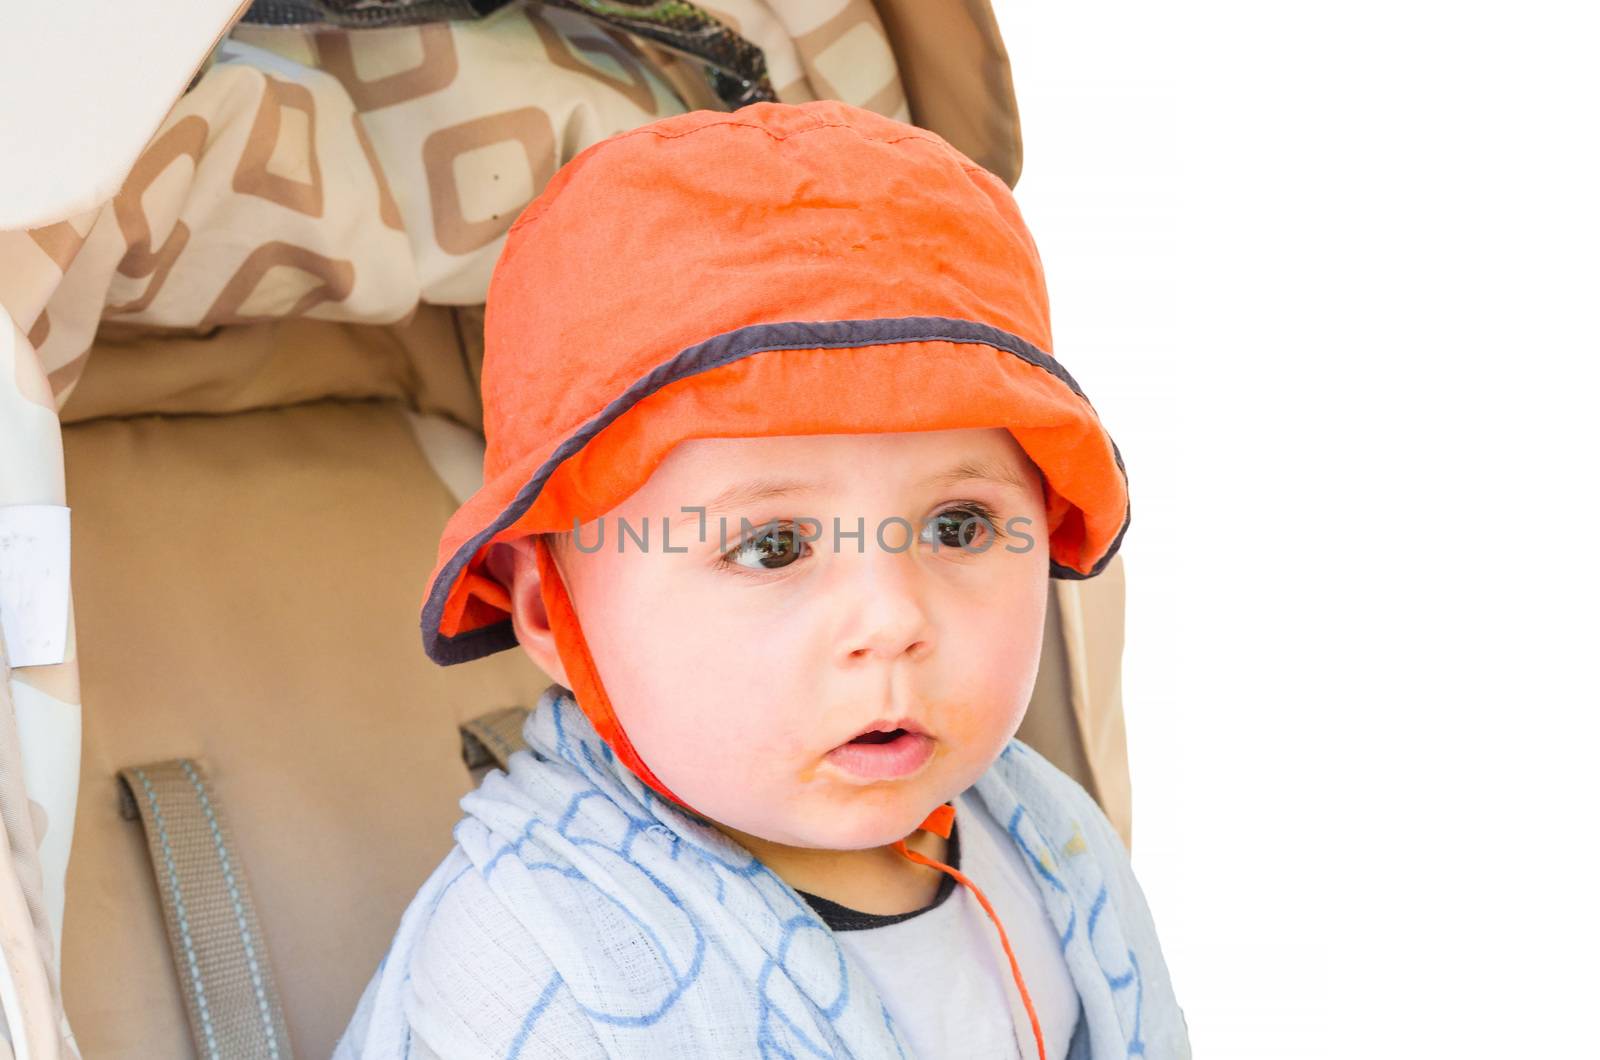  Baby with orange cap by JFsPic